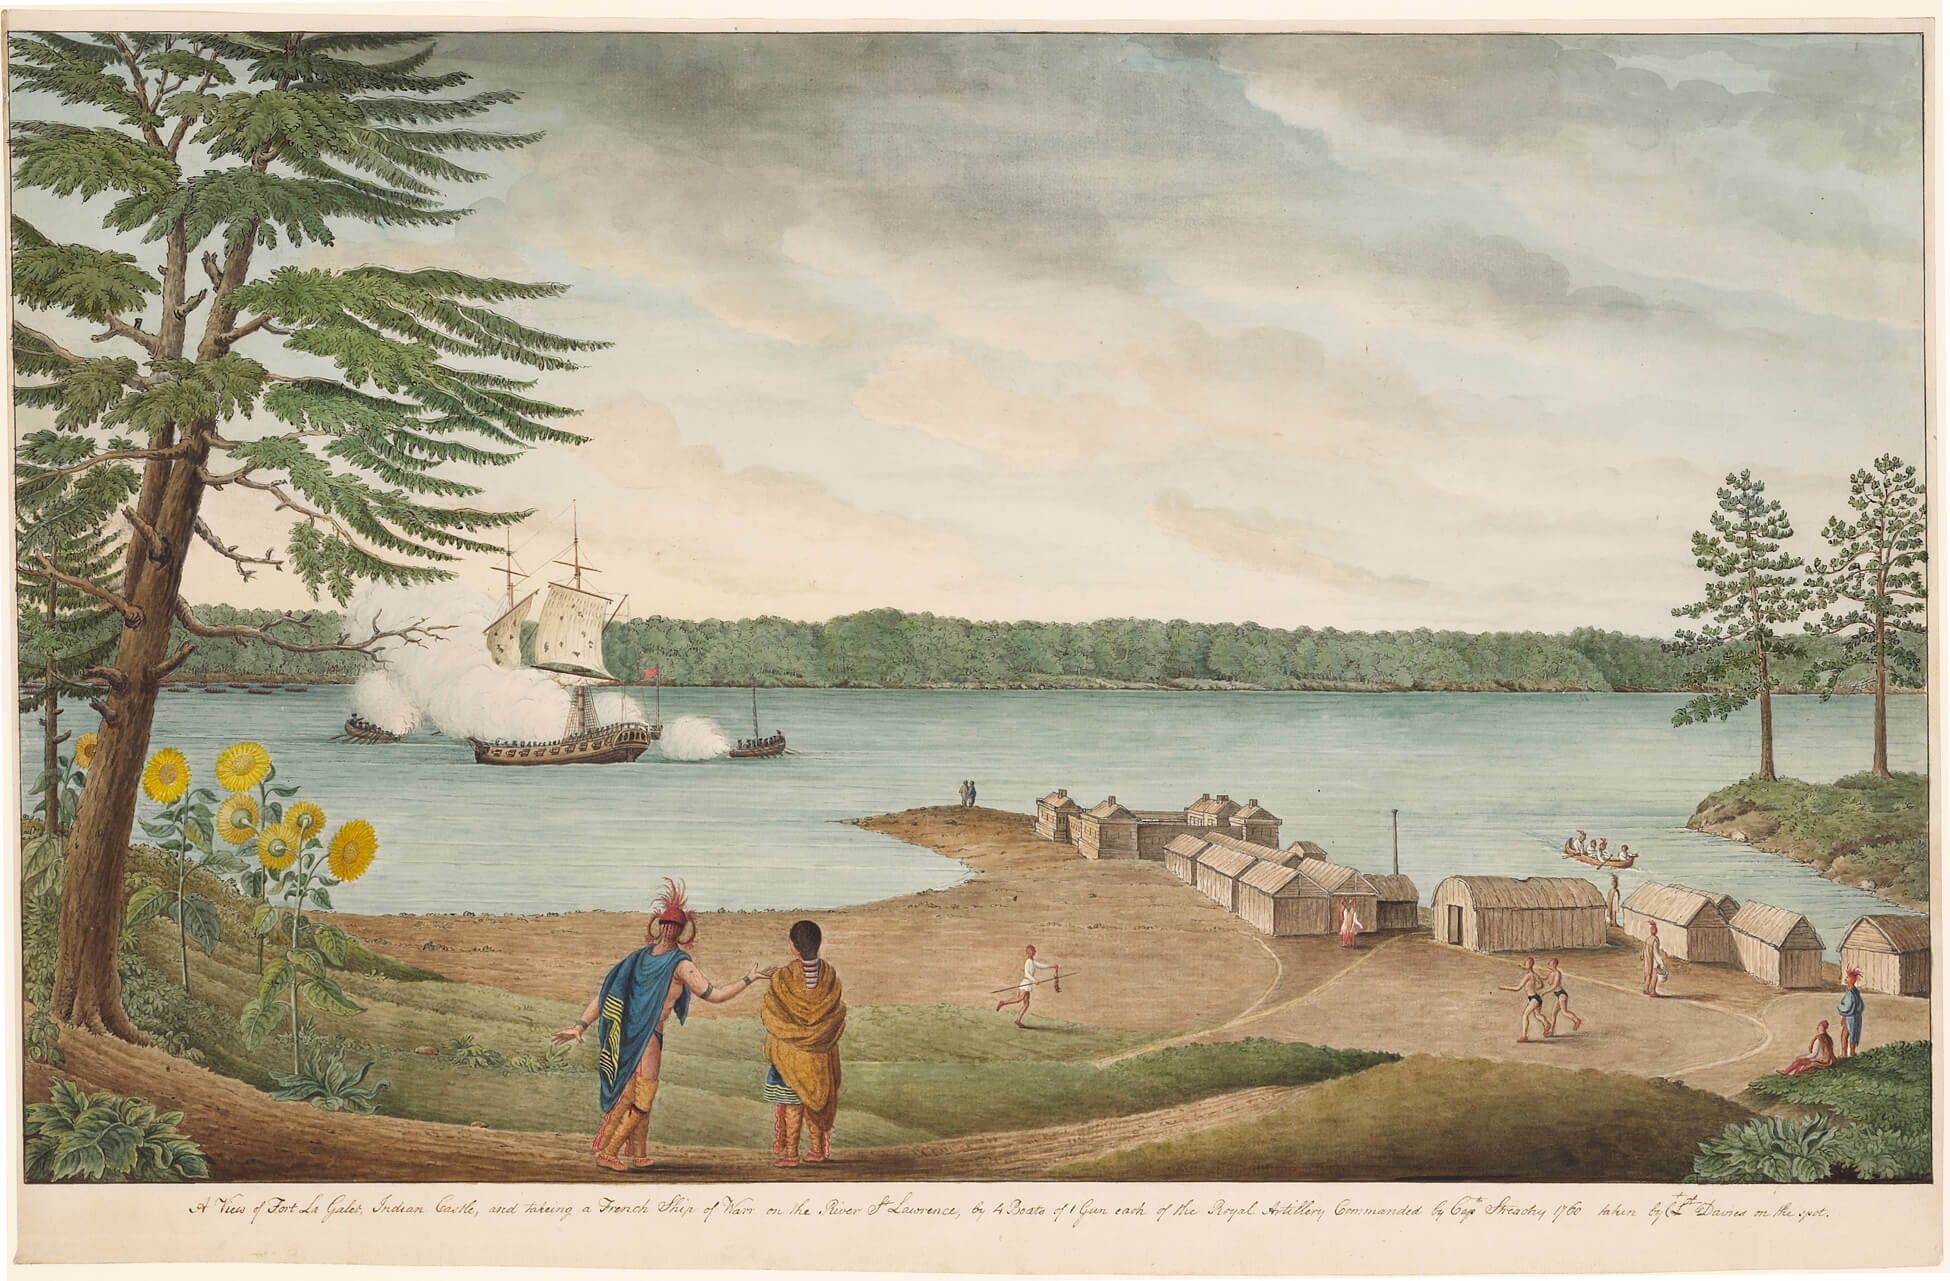 A View of Fort La Galette, Indian Castle, and Taking a French Ship of War on the River St. Lawrence, by Four Boats of One Gun Each of the Royal Artillery Commanded by Captain Streachy